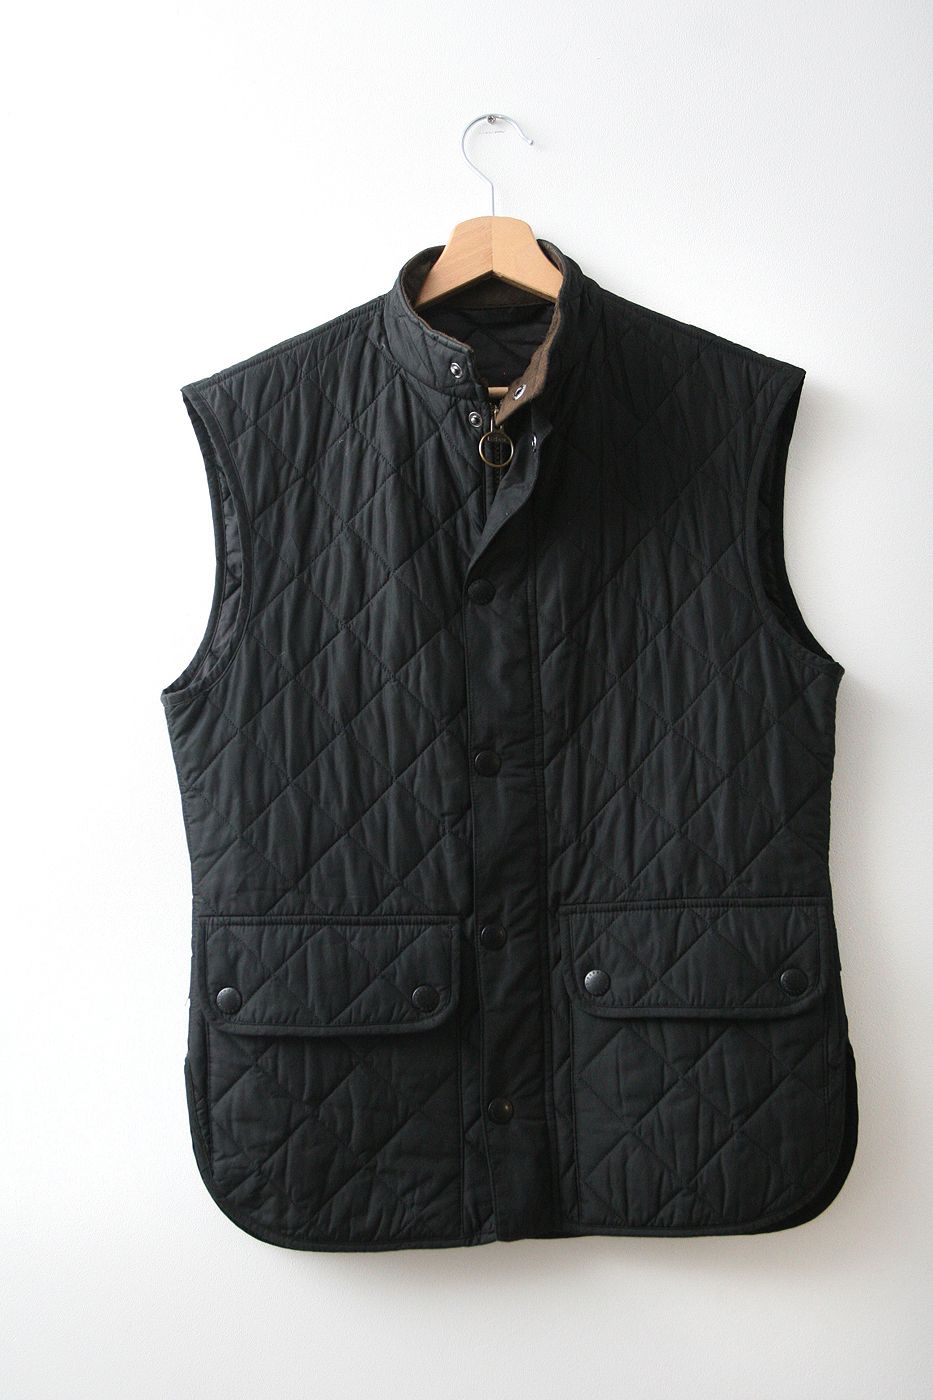 Barbour Barbour England Lowerdale Black Quilted Gilet Vest S Size US S / EU 44-46 / 1 - 1 Preview